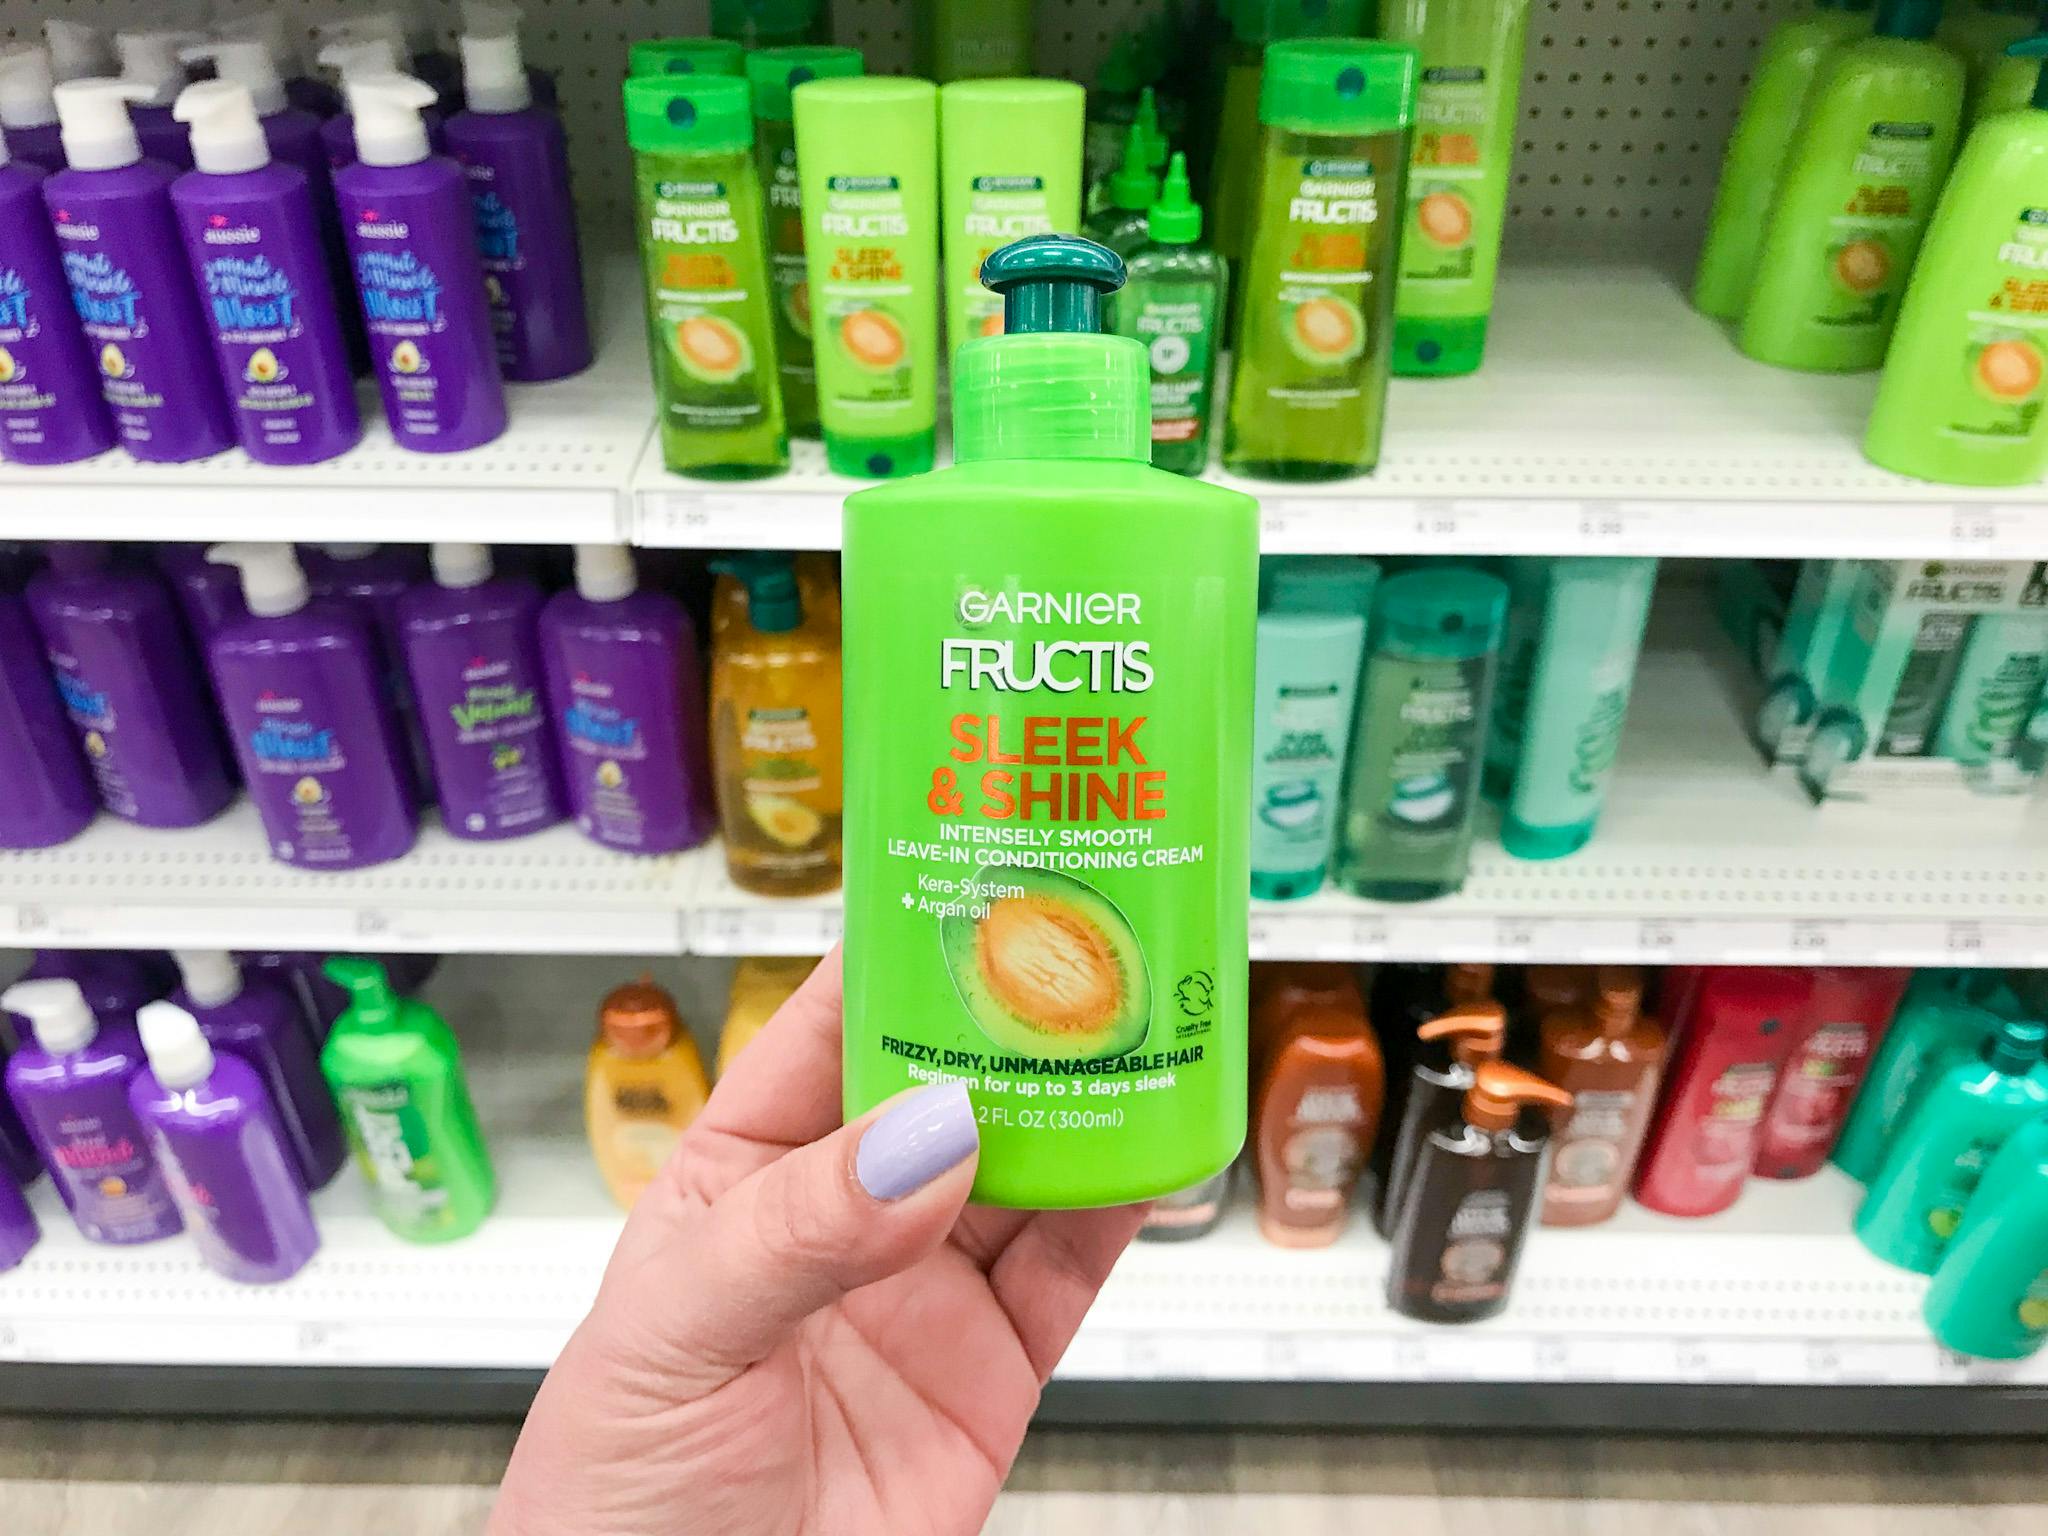 A person's hand holding up a bottle of Garnier Fructis Sleek & Shine Leave-in Conditioner in front of a shelf of haircare products at Target.